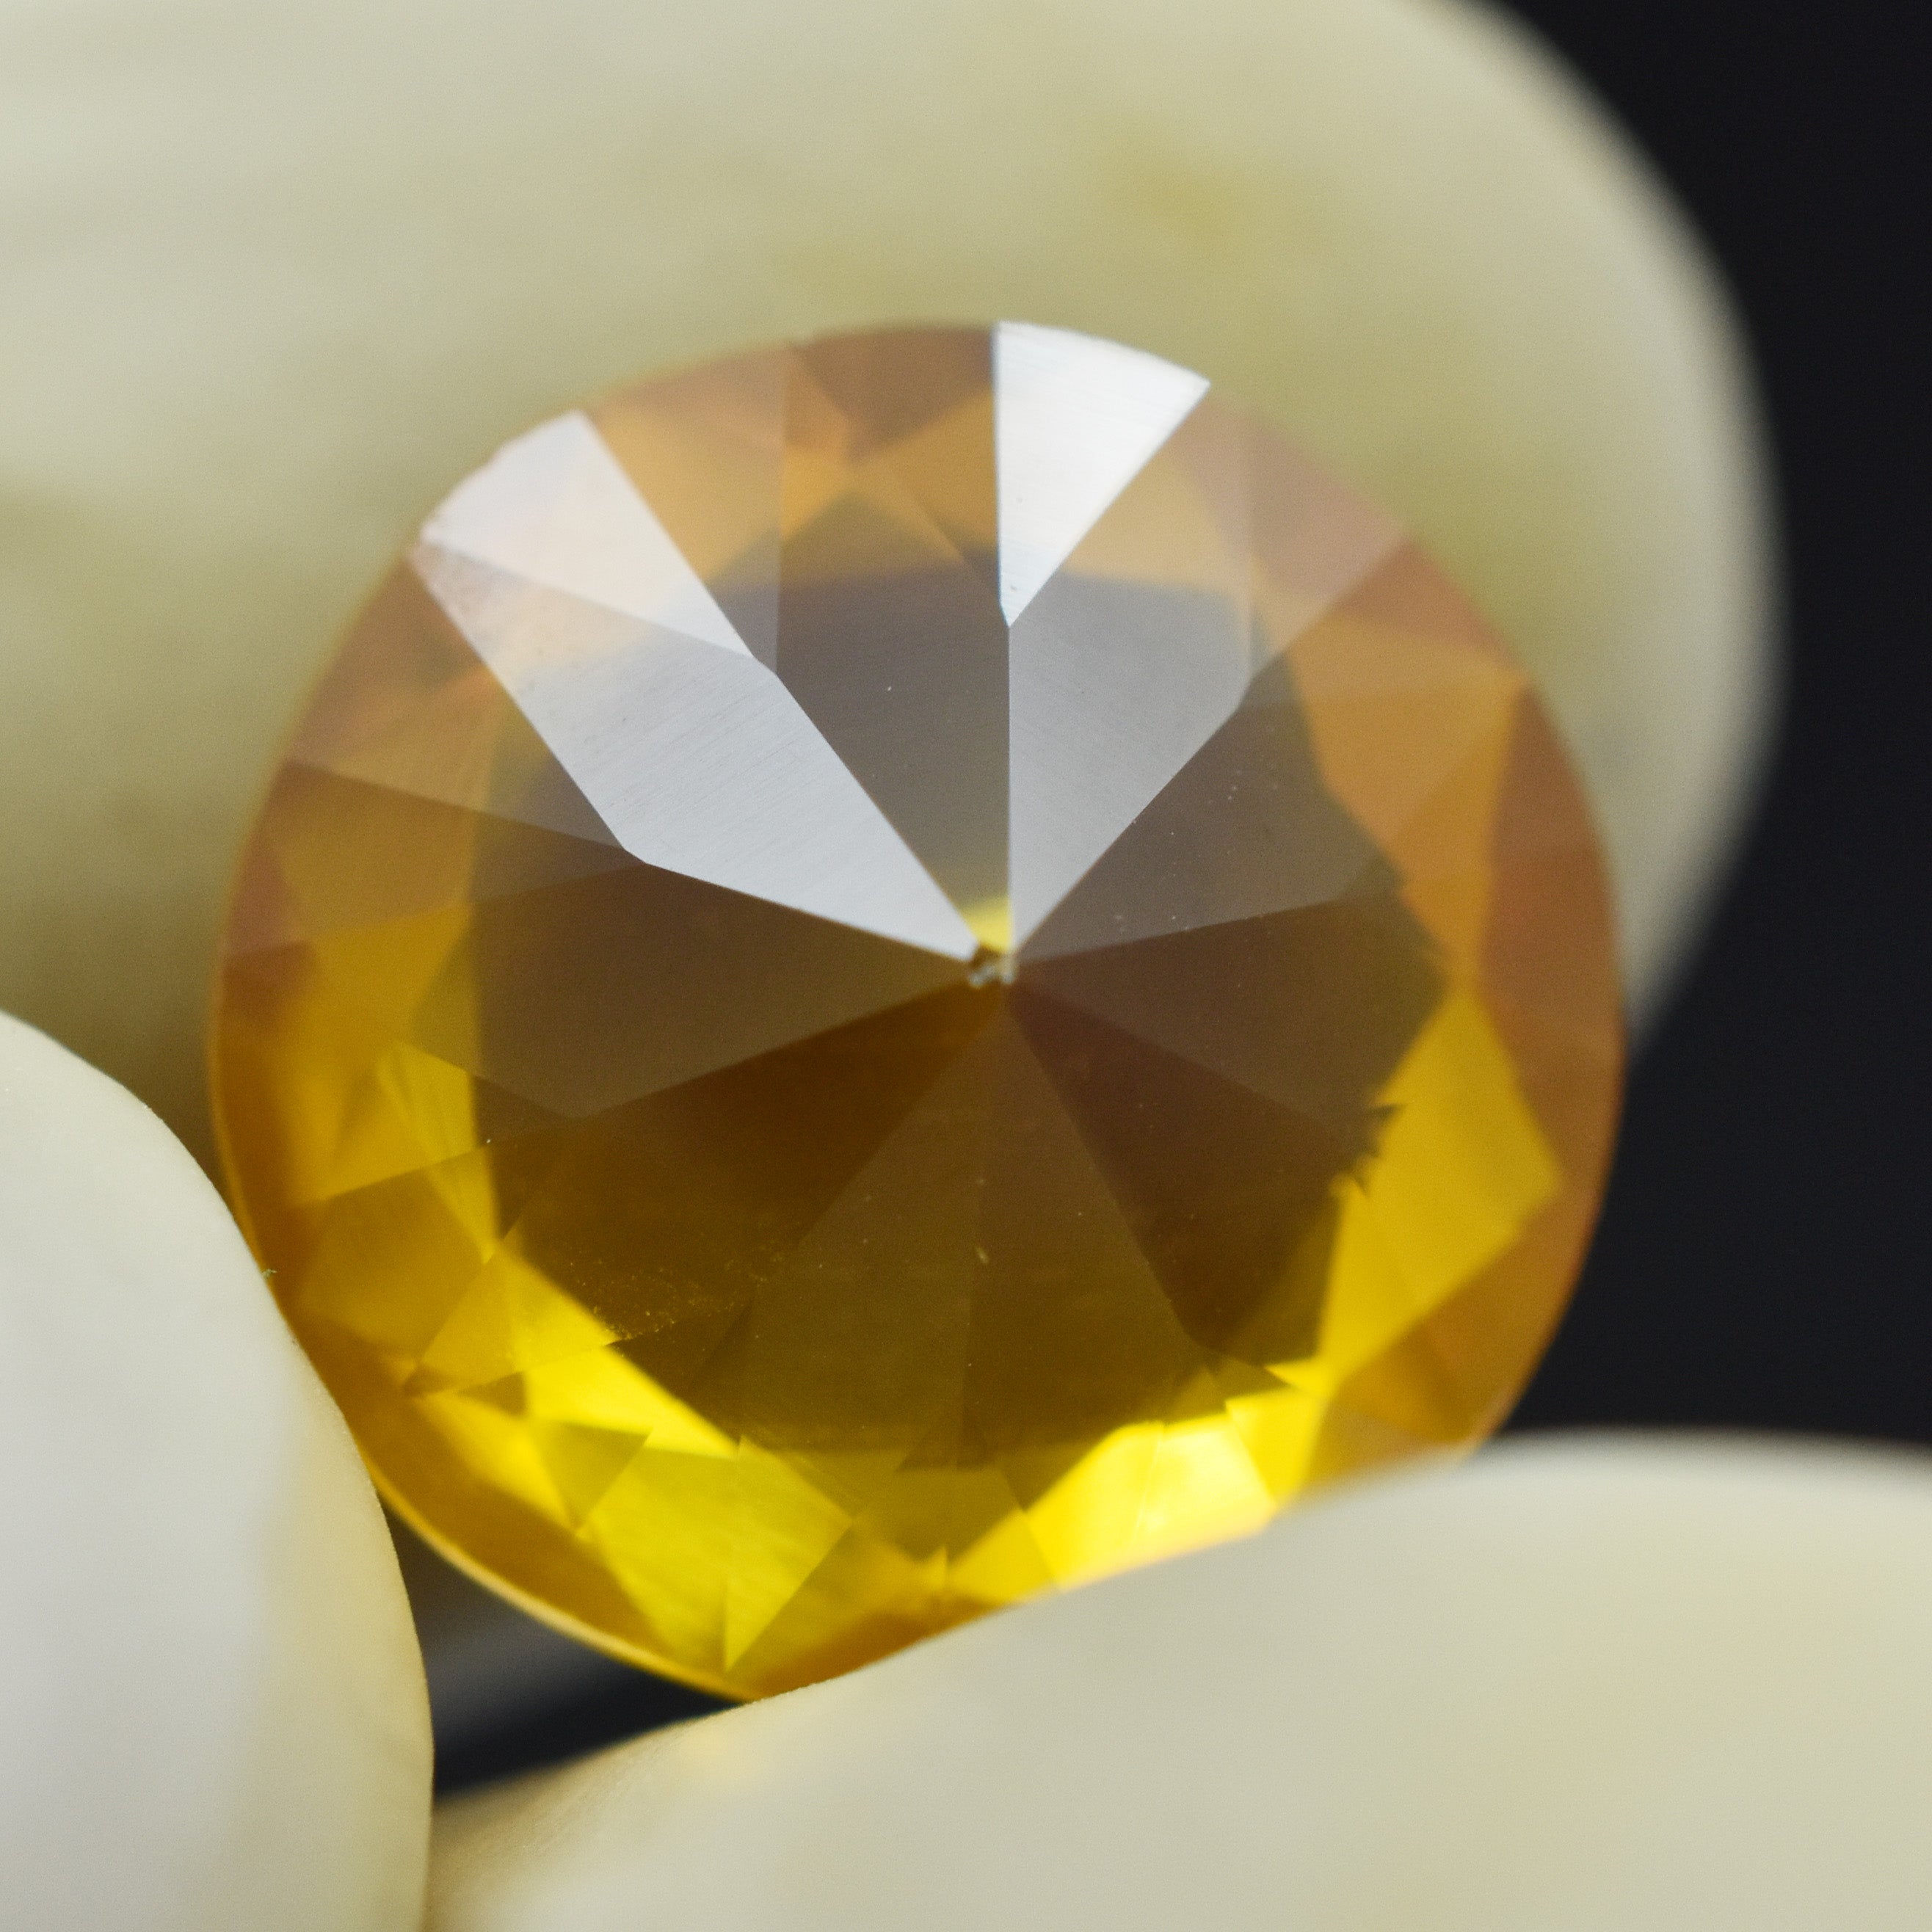 Sapphire Gem Jewelry 6.15 Carat Yellow Sapphire Round Cut Natural Certified Loose Gemstone Best For Good Fortune and Prosperity